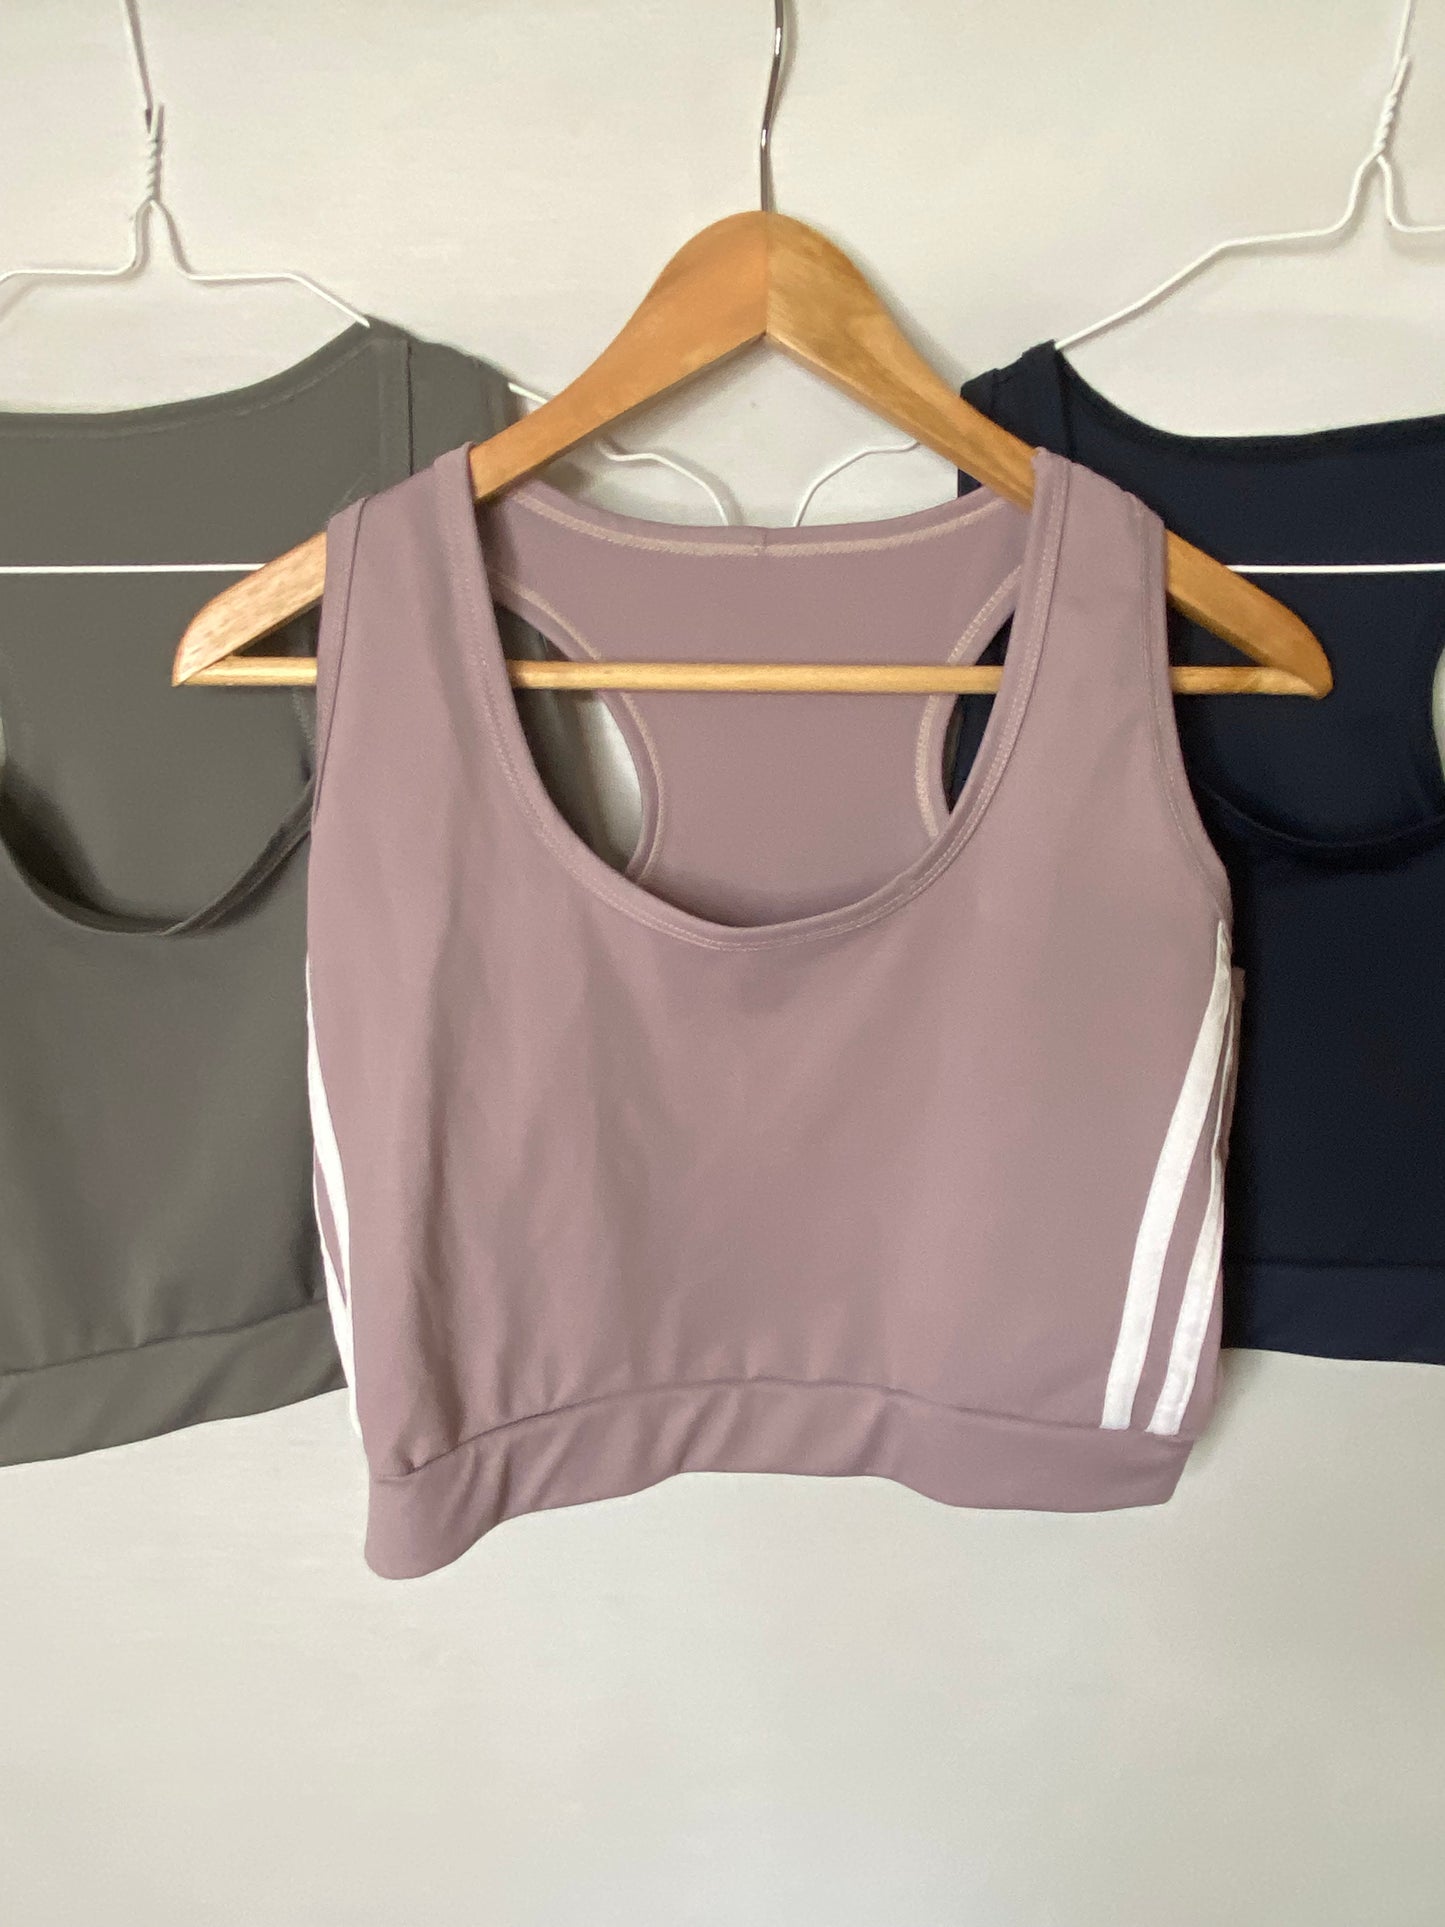 Unbranded - 14-16 3 piece set pink navy grey sports tops